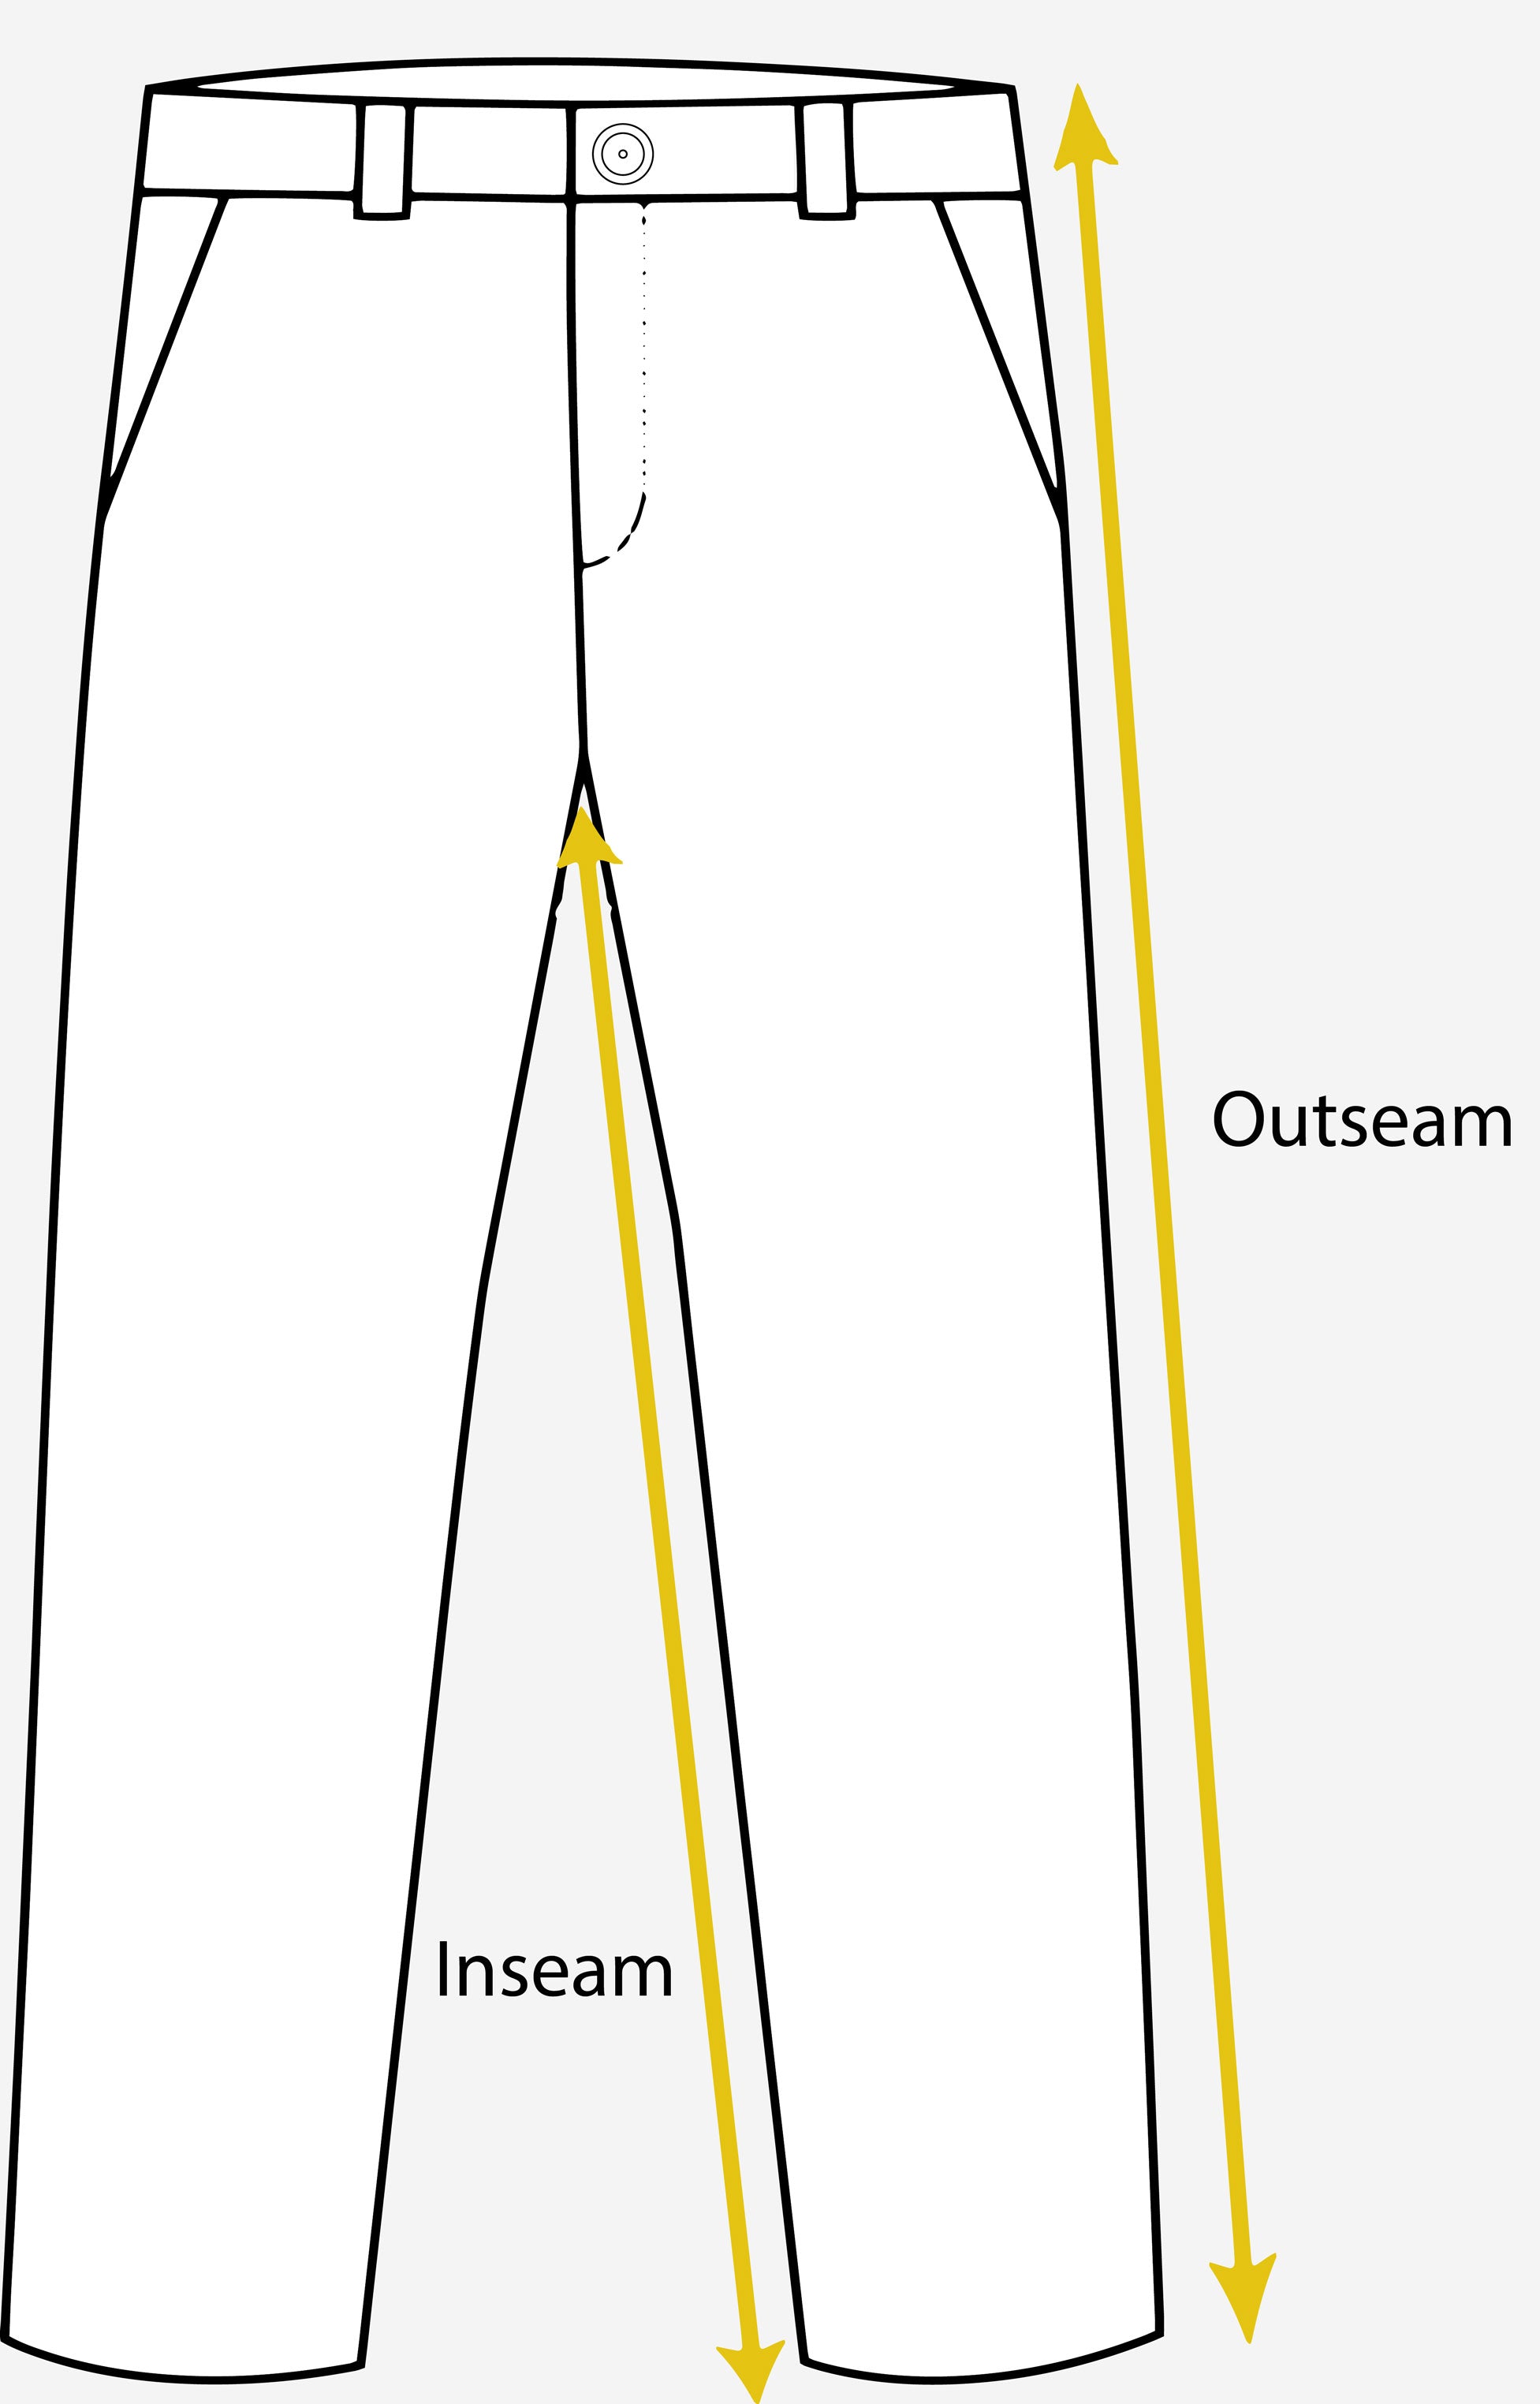 1 Jean Size Chart  Converter  Width  Length  How to 